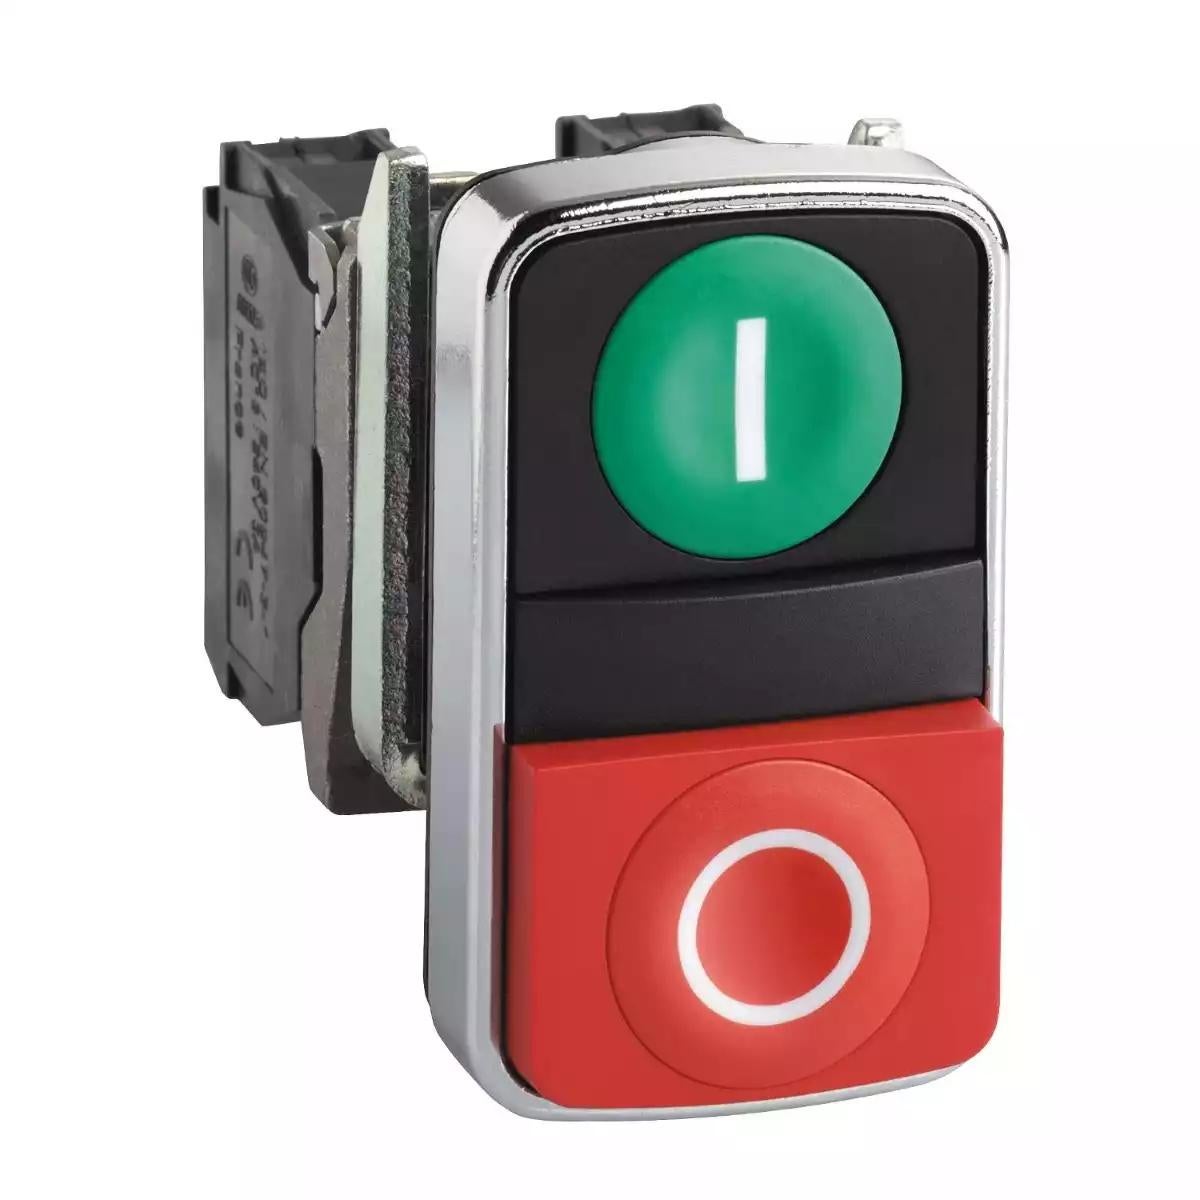 Double-headed push button, metal, Ø22, 1 green flush marked I + 1 red projecting marked O, 1 NO + 1 NC